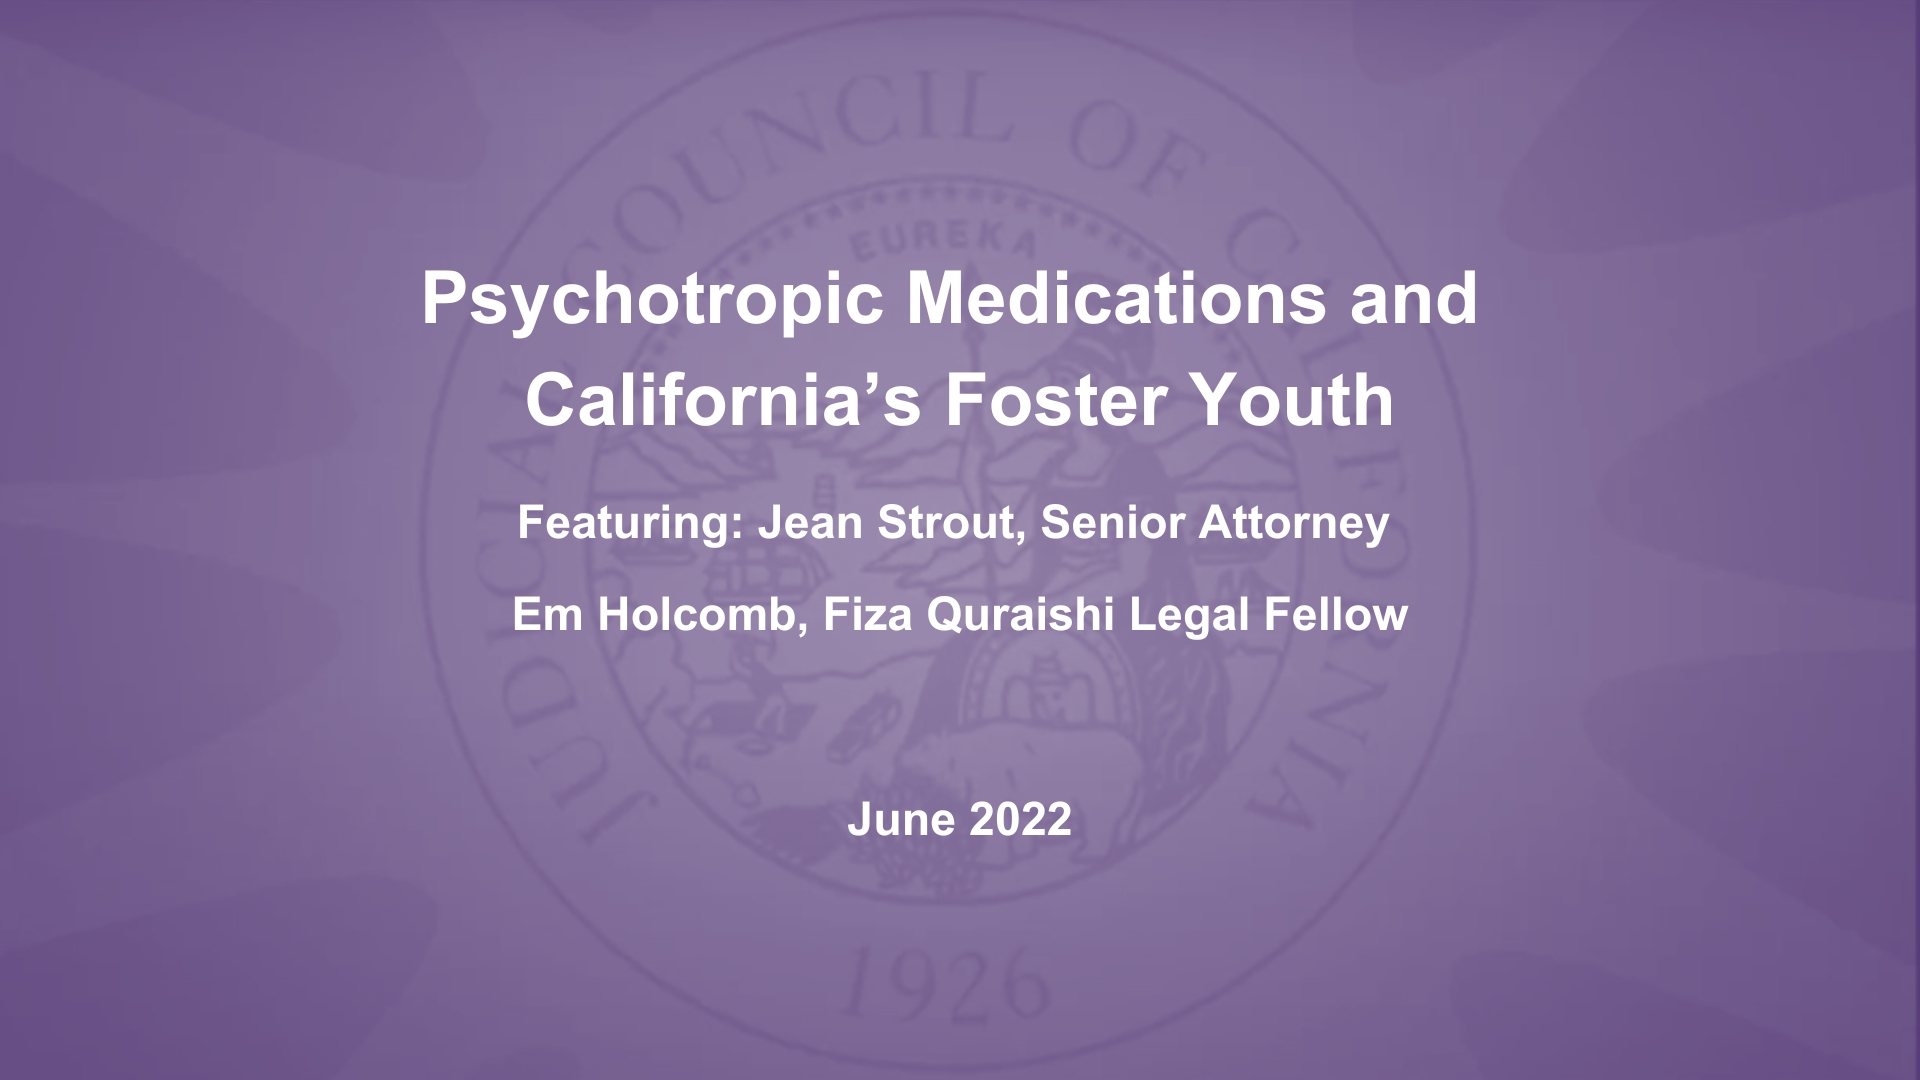 Psychotropic Medication and California’s Foster Youth